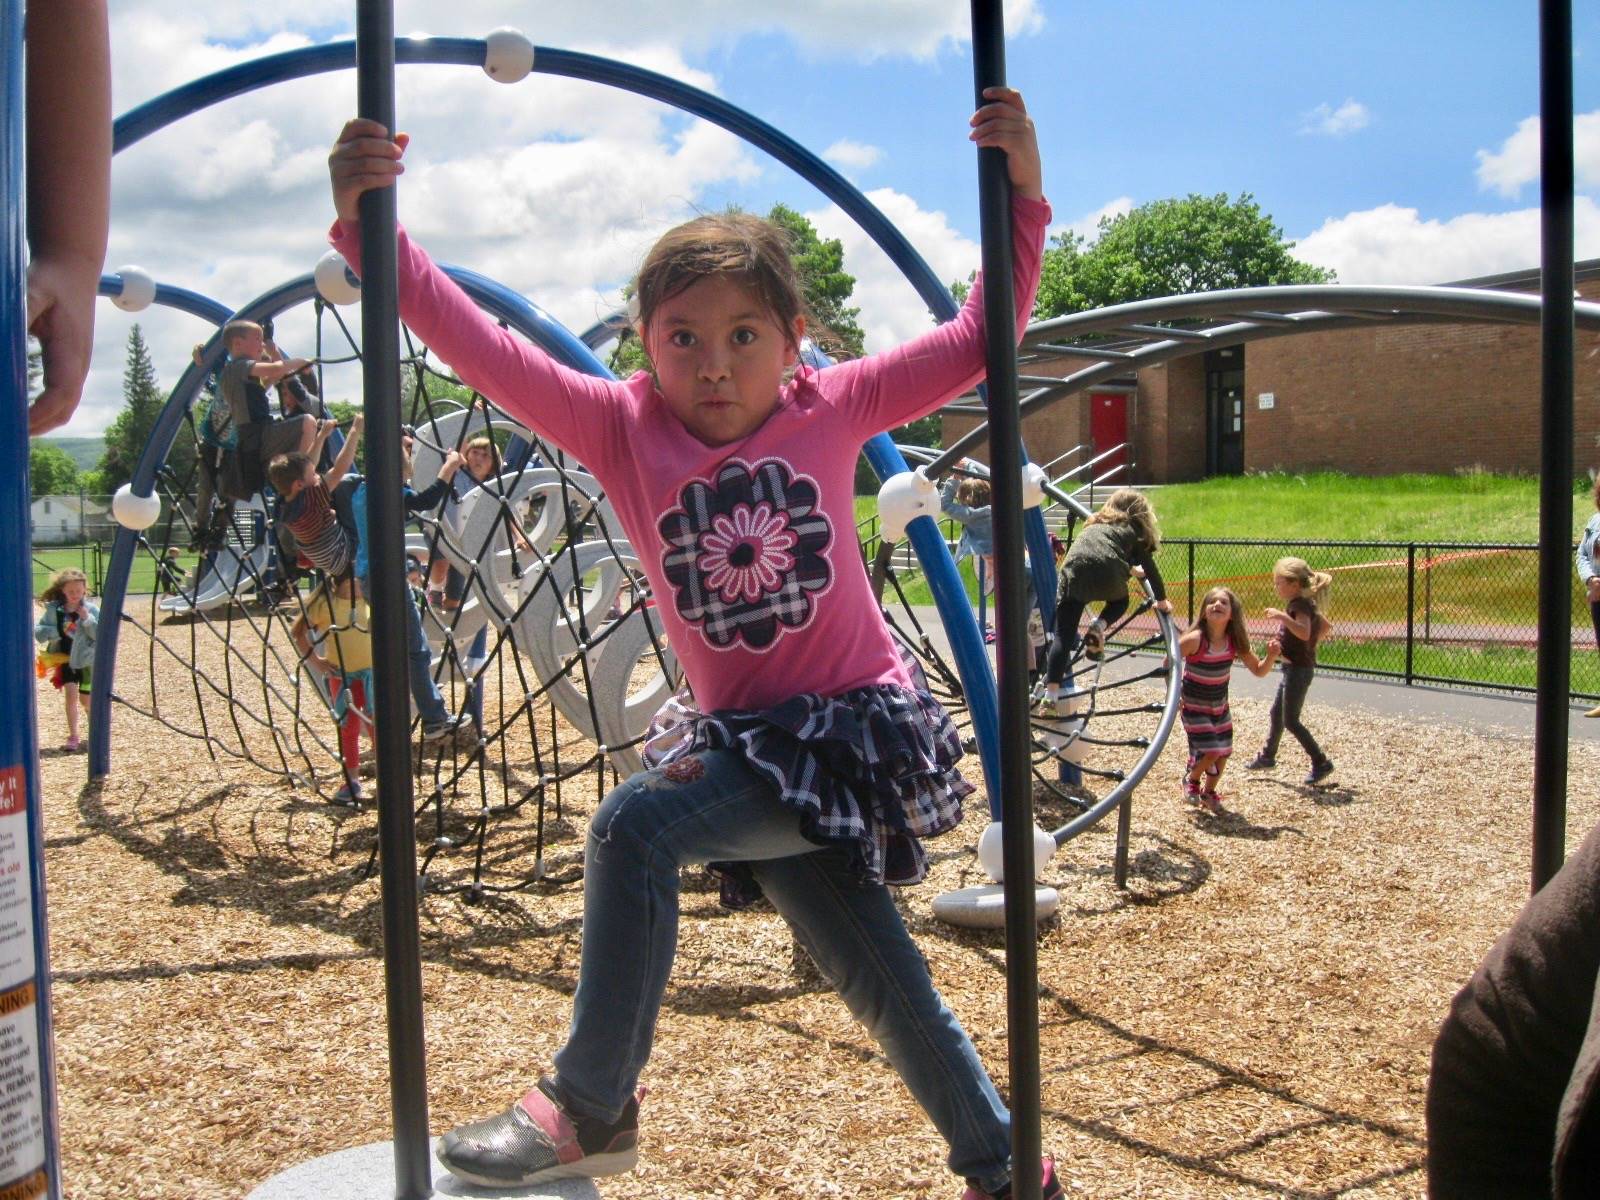 A student balancing on the playground.